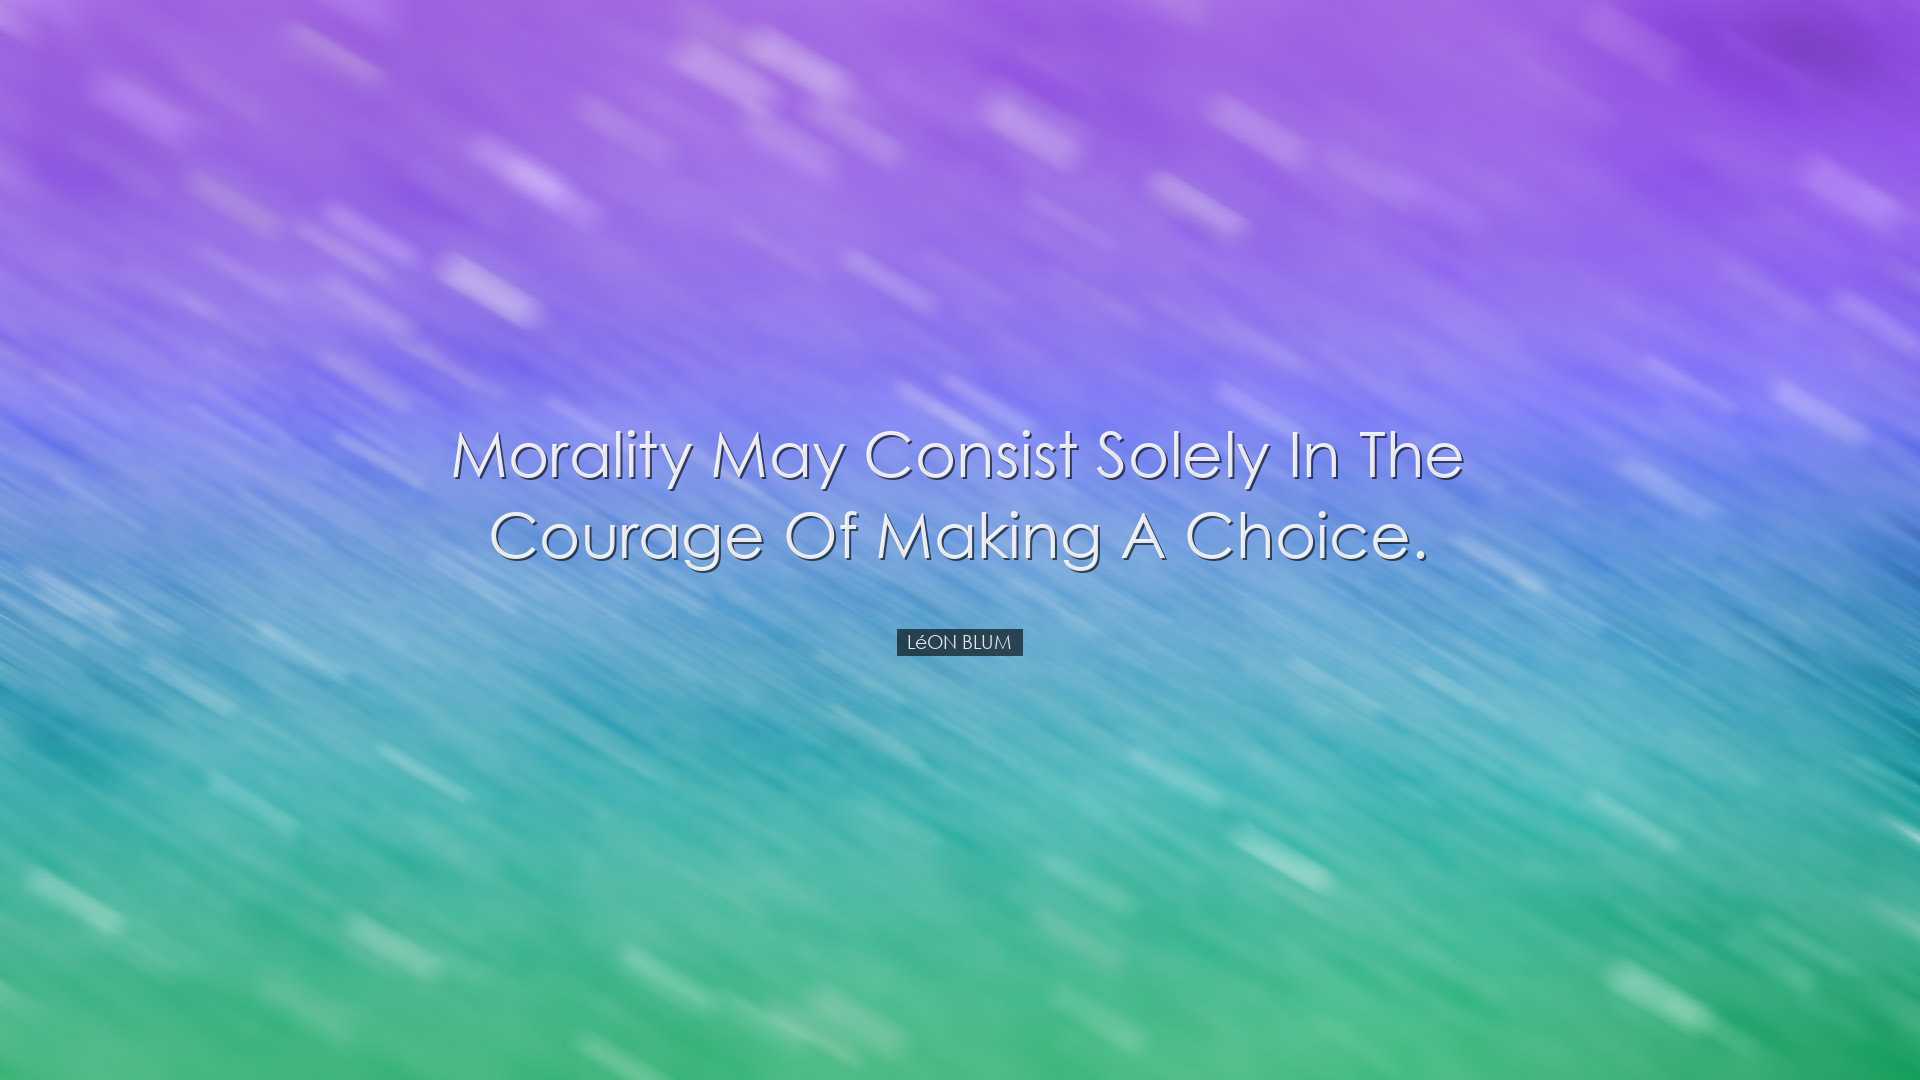 Morality may consist solely in the courage of making a choice. - L